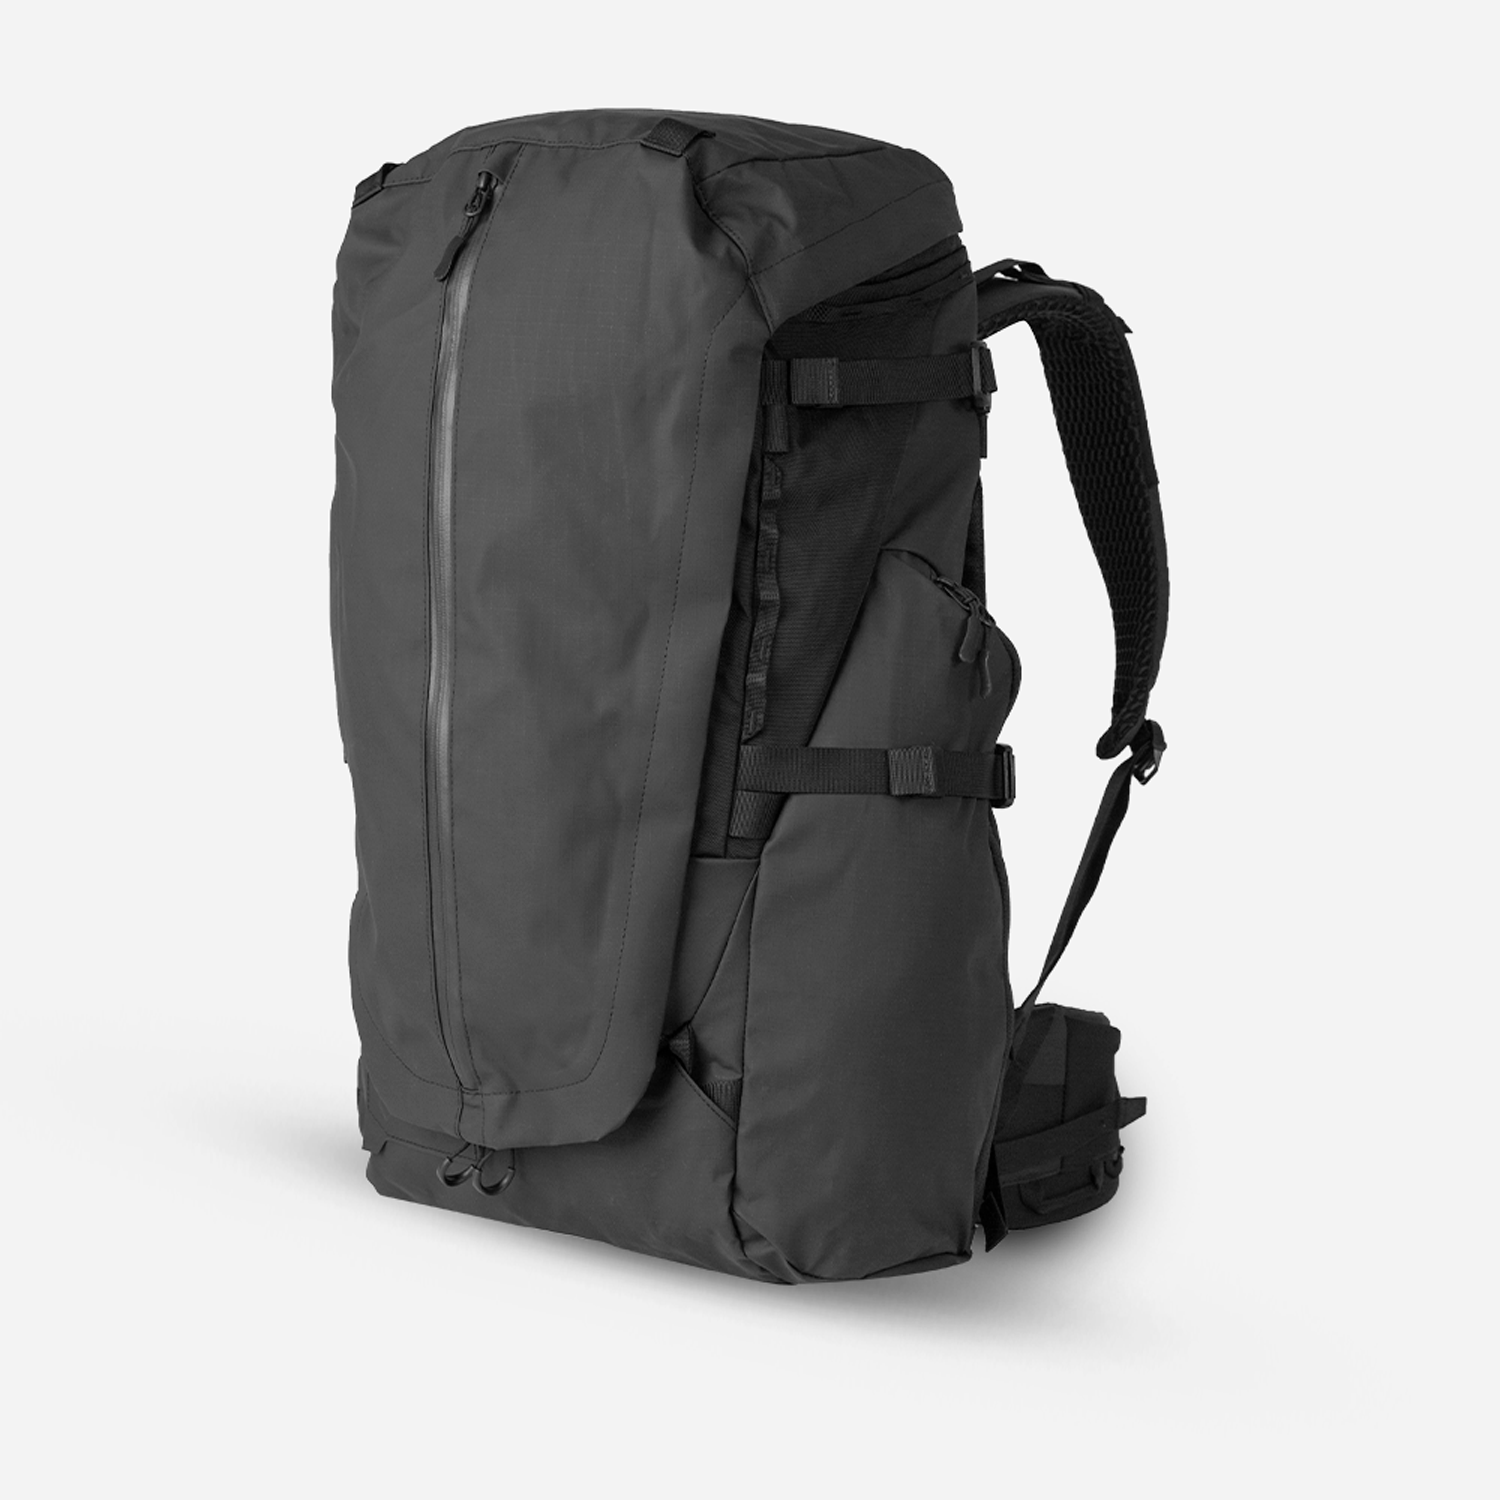 Finding the right camera backpack for large format 4x5 photography ...